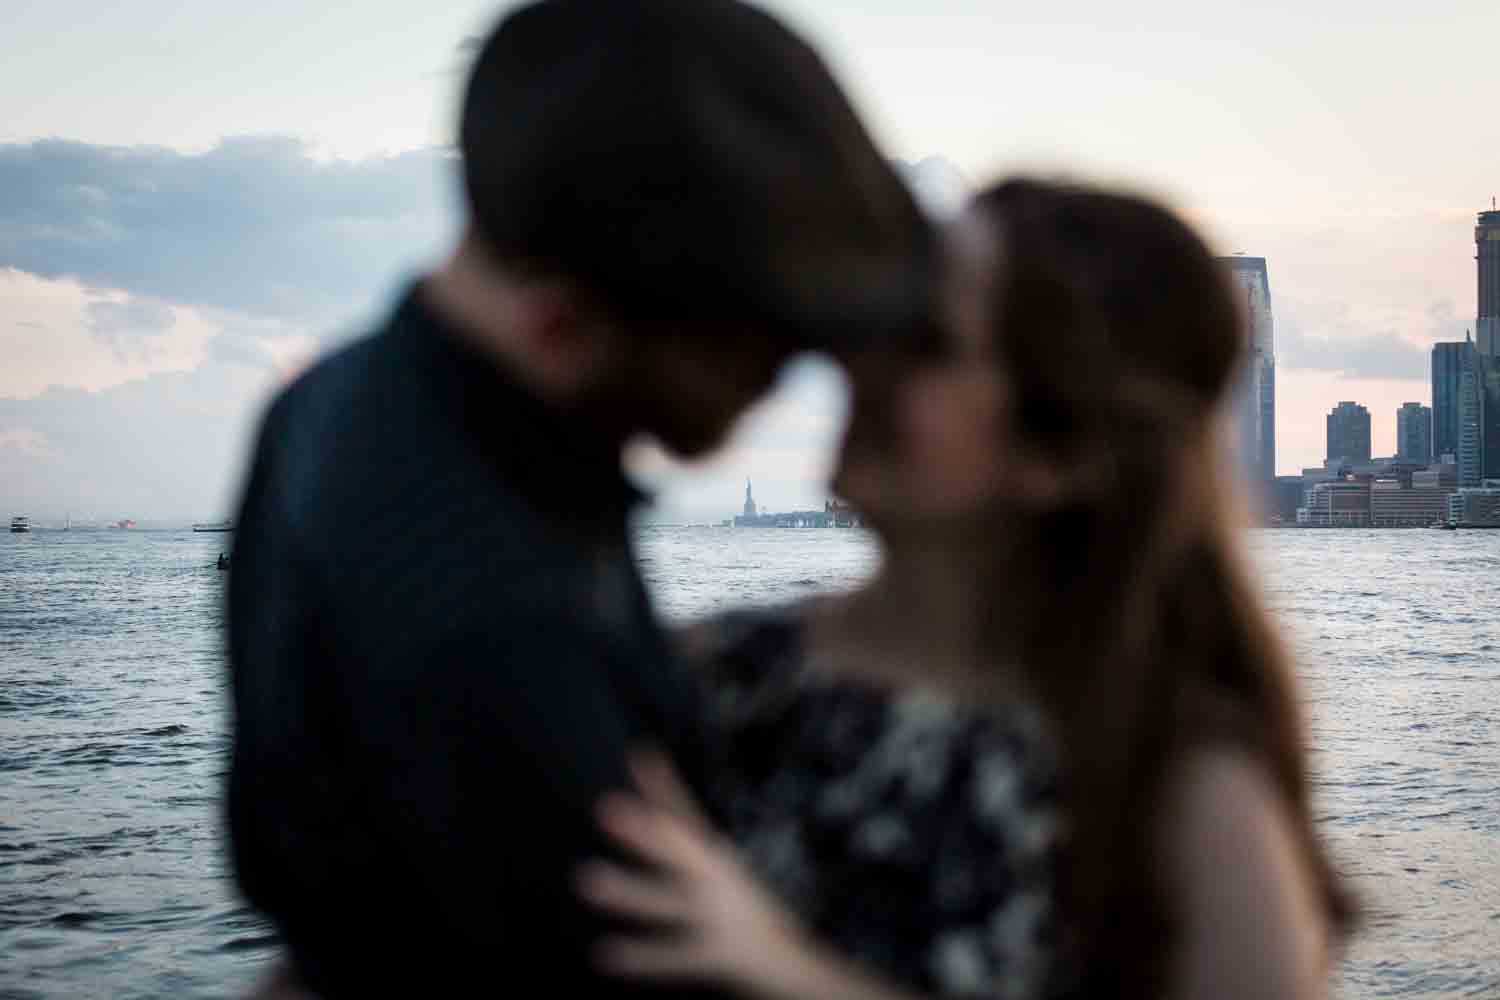 Couple out of focus kissing with Statue of Liberty in background